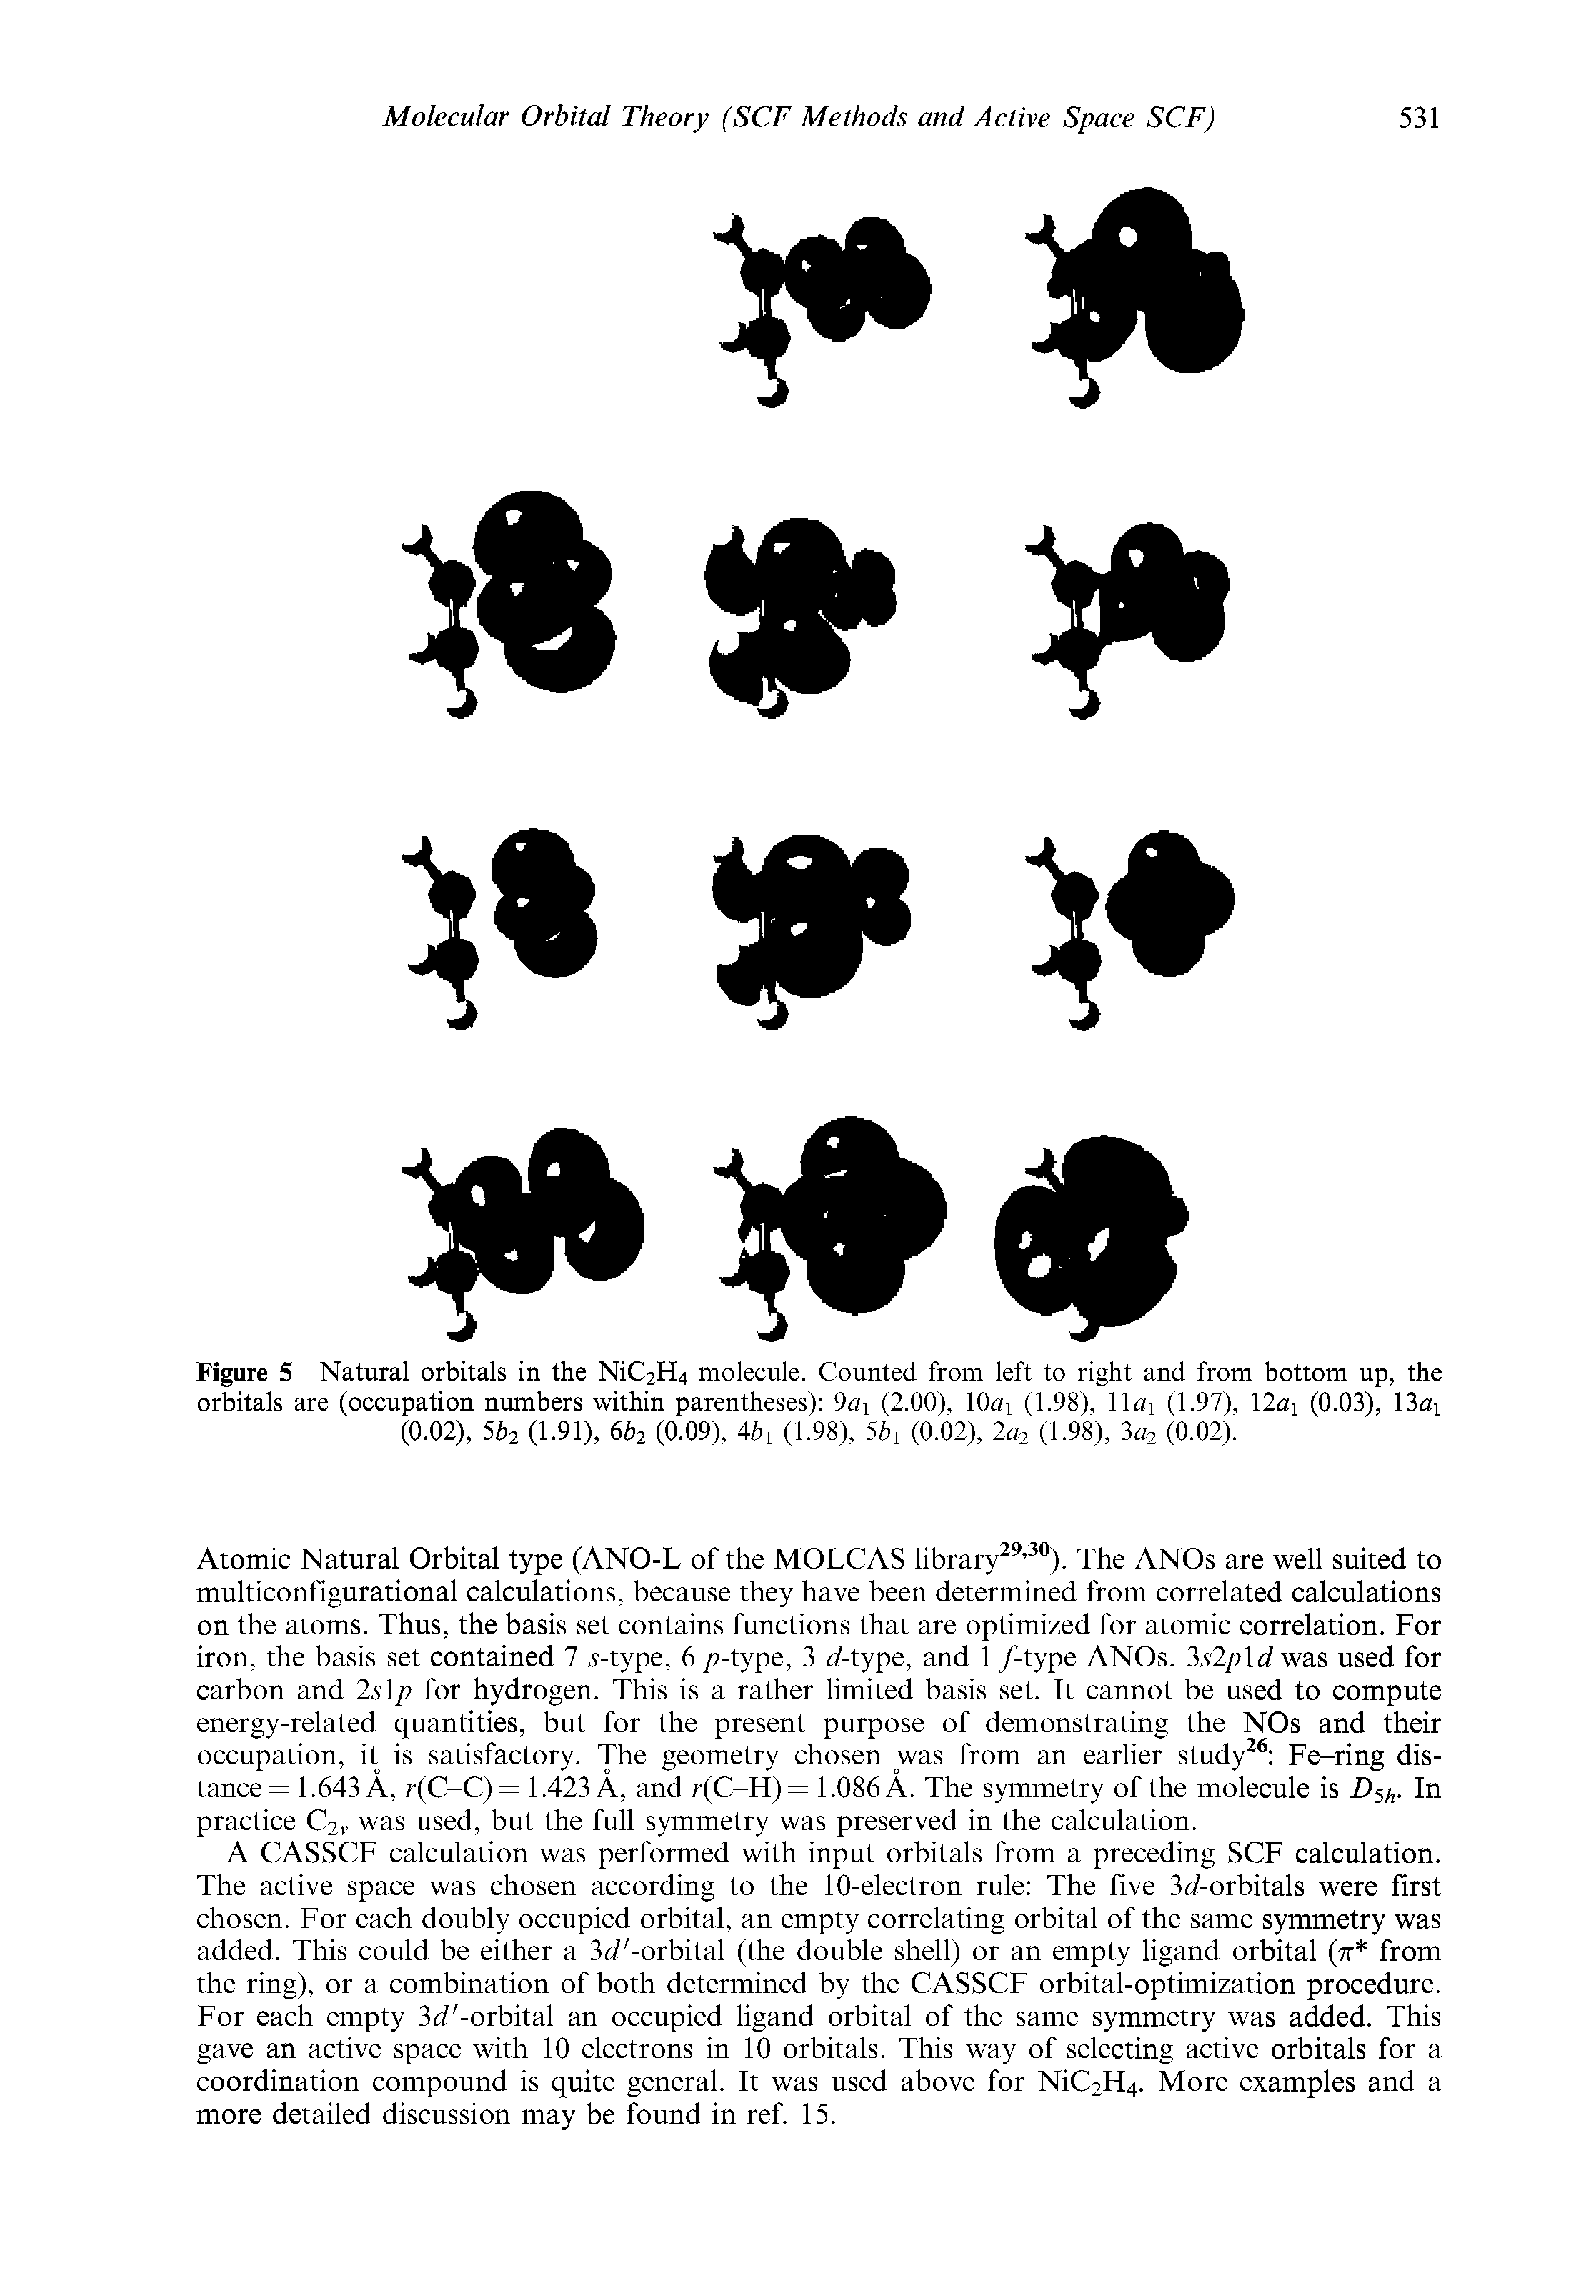 Figure 5 Natural orbitals in the MC2H4 molecule. Counted from left to right and from bottom up, the orbitals are (occupation numbers within parentheses) 9a (2.00), lOai (1.98), llai (1.97), 12ai (0.03), 13ai (0.02), 5b2 (1.91), 6b2 (0.09), 4/>i (1.98), 5bi (0.02), 2 2 (1-98), 3 2 (0.02).